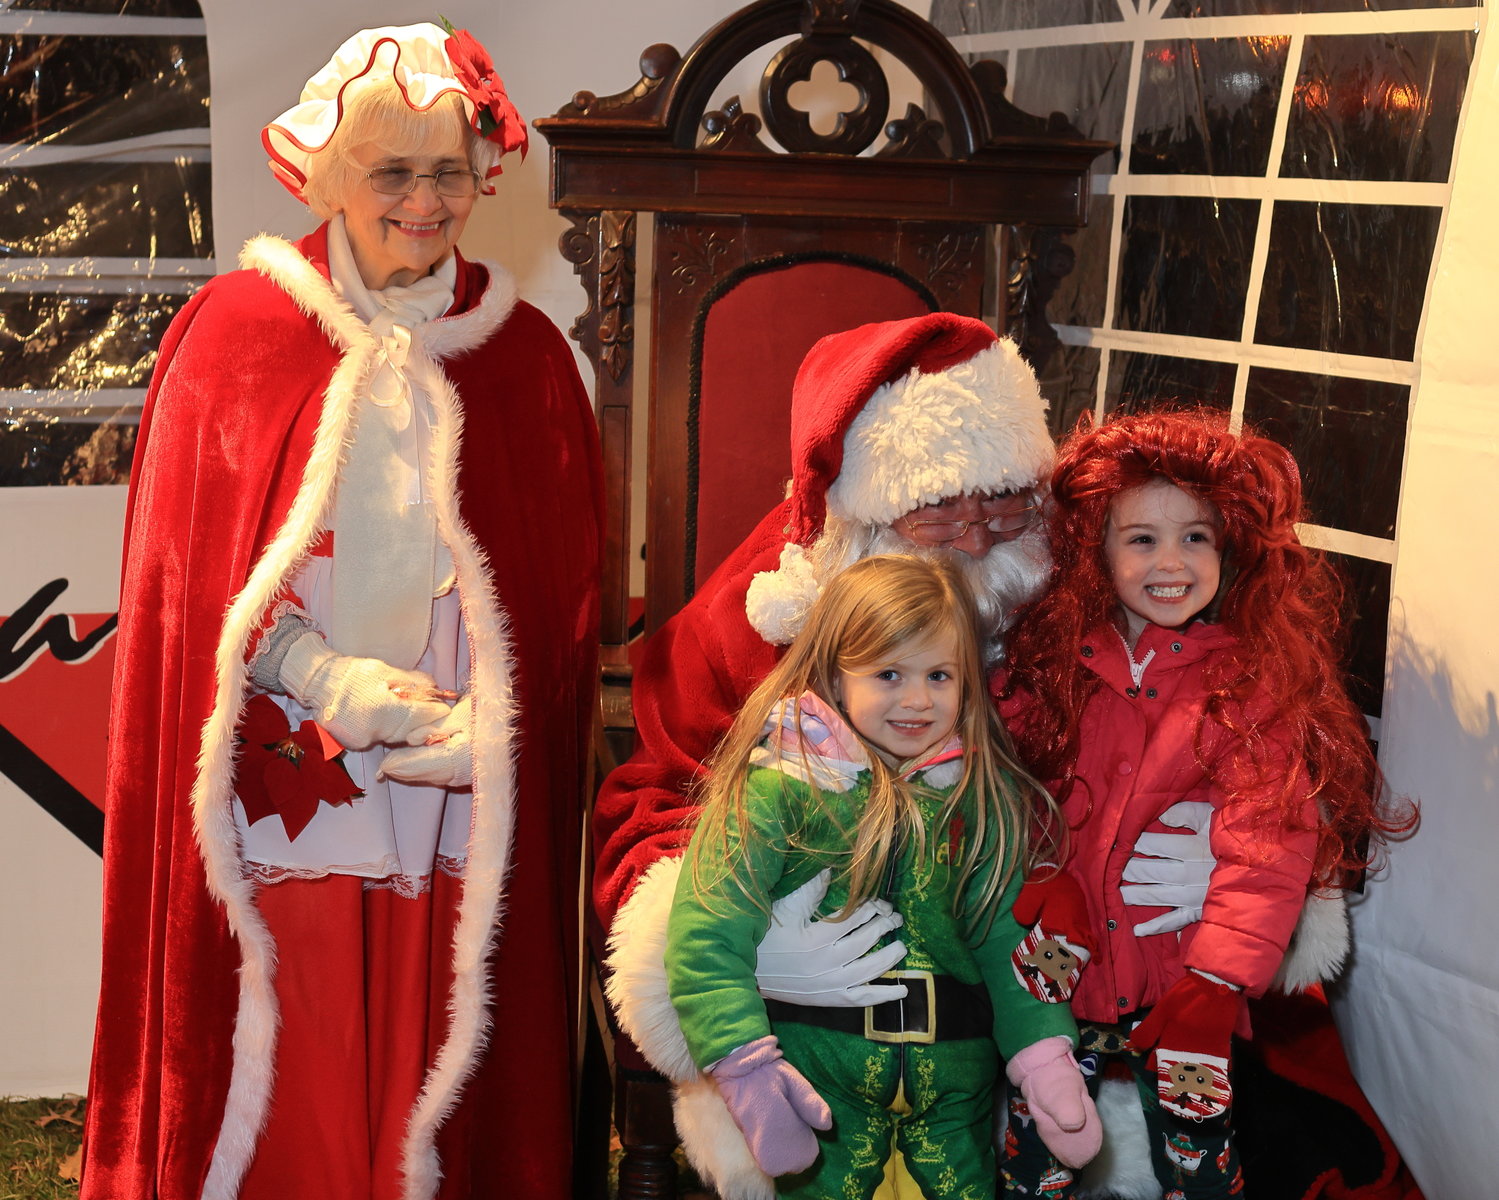 Santa and Mrs. Claus greet children in Honesdale’s Central Park following the annual Santa Parade.